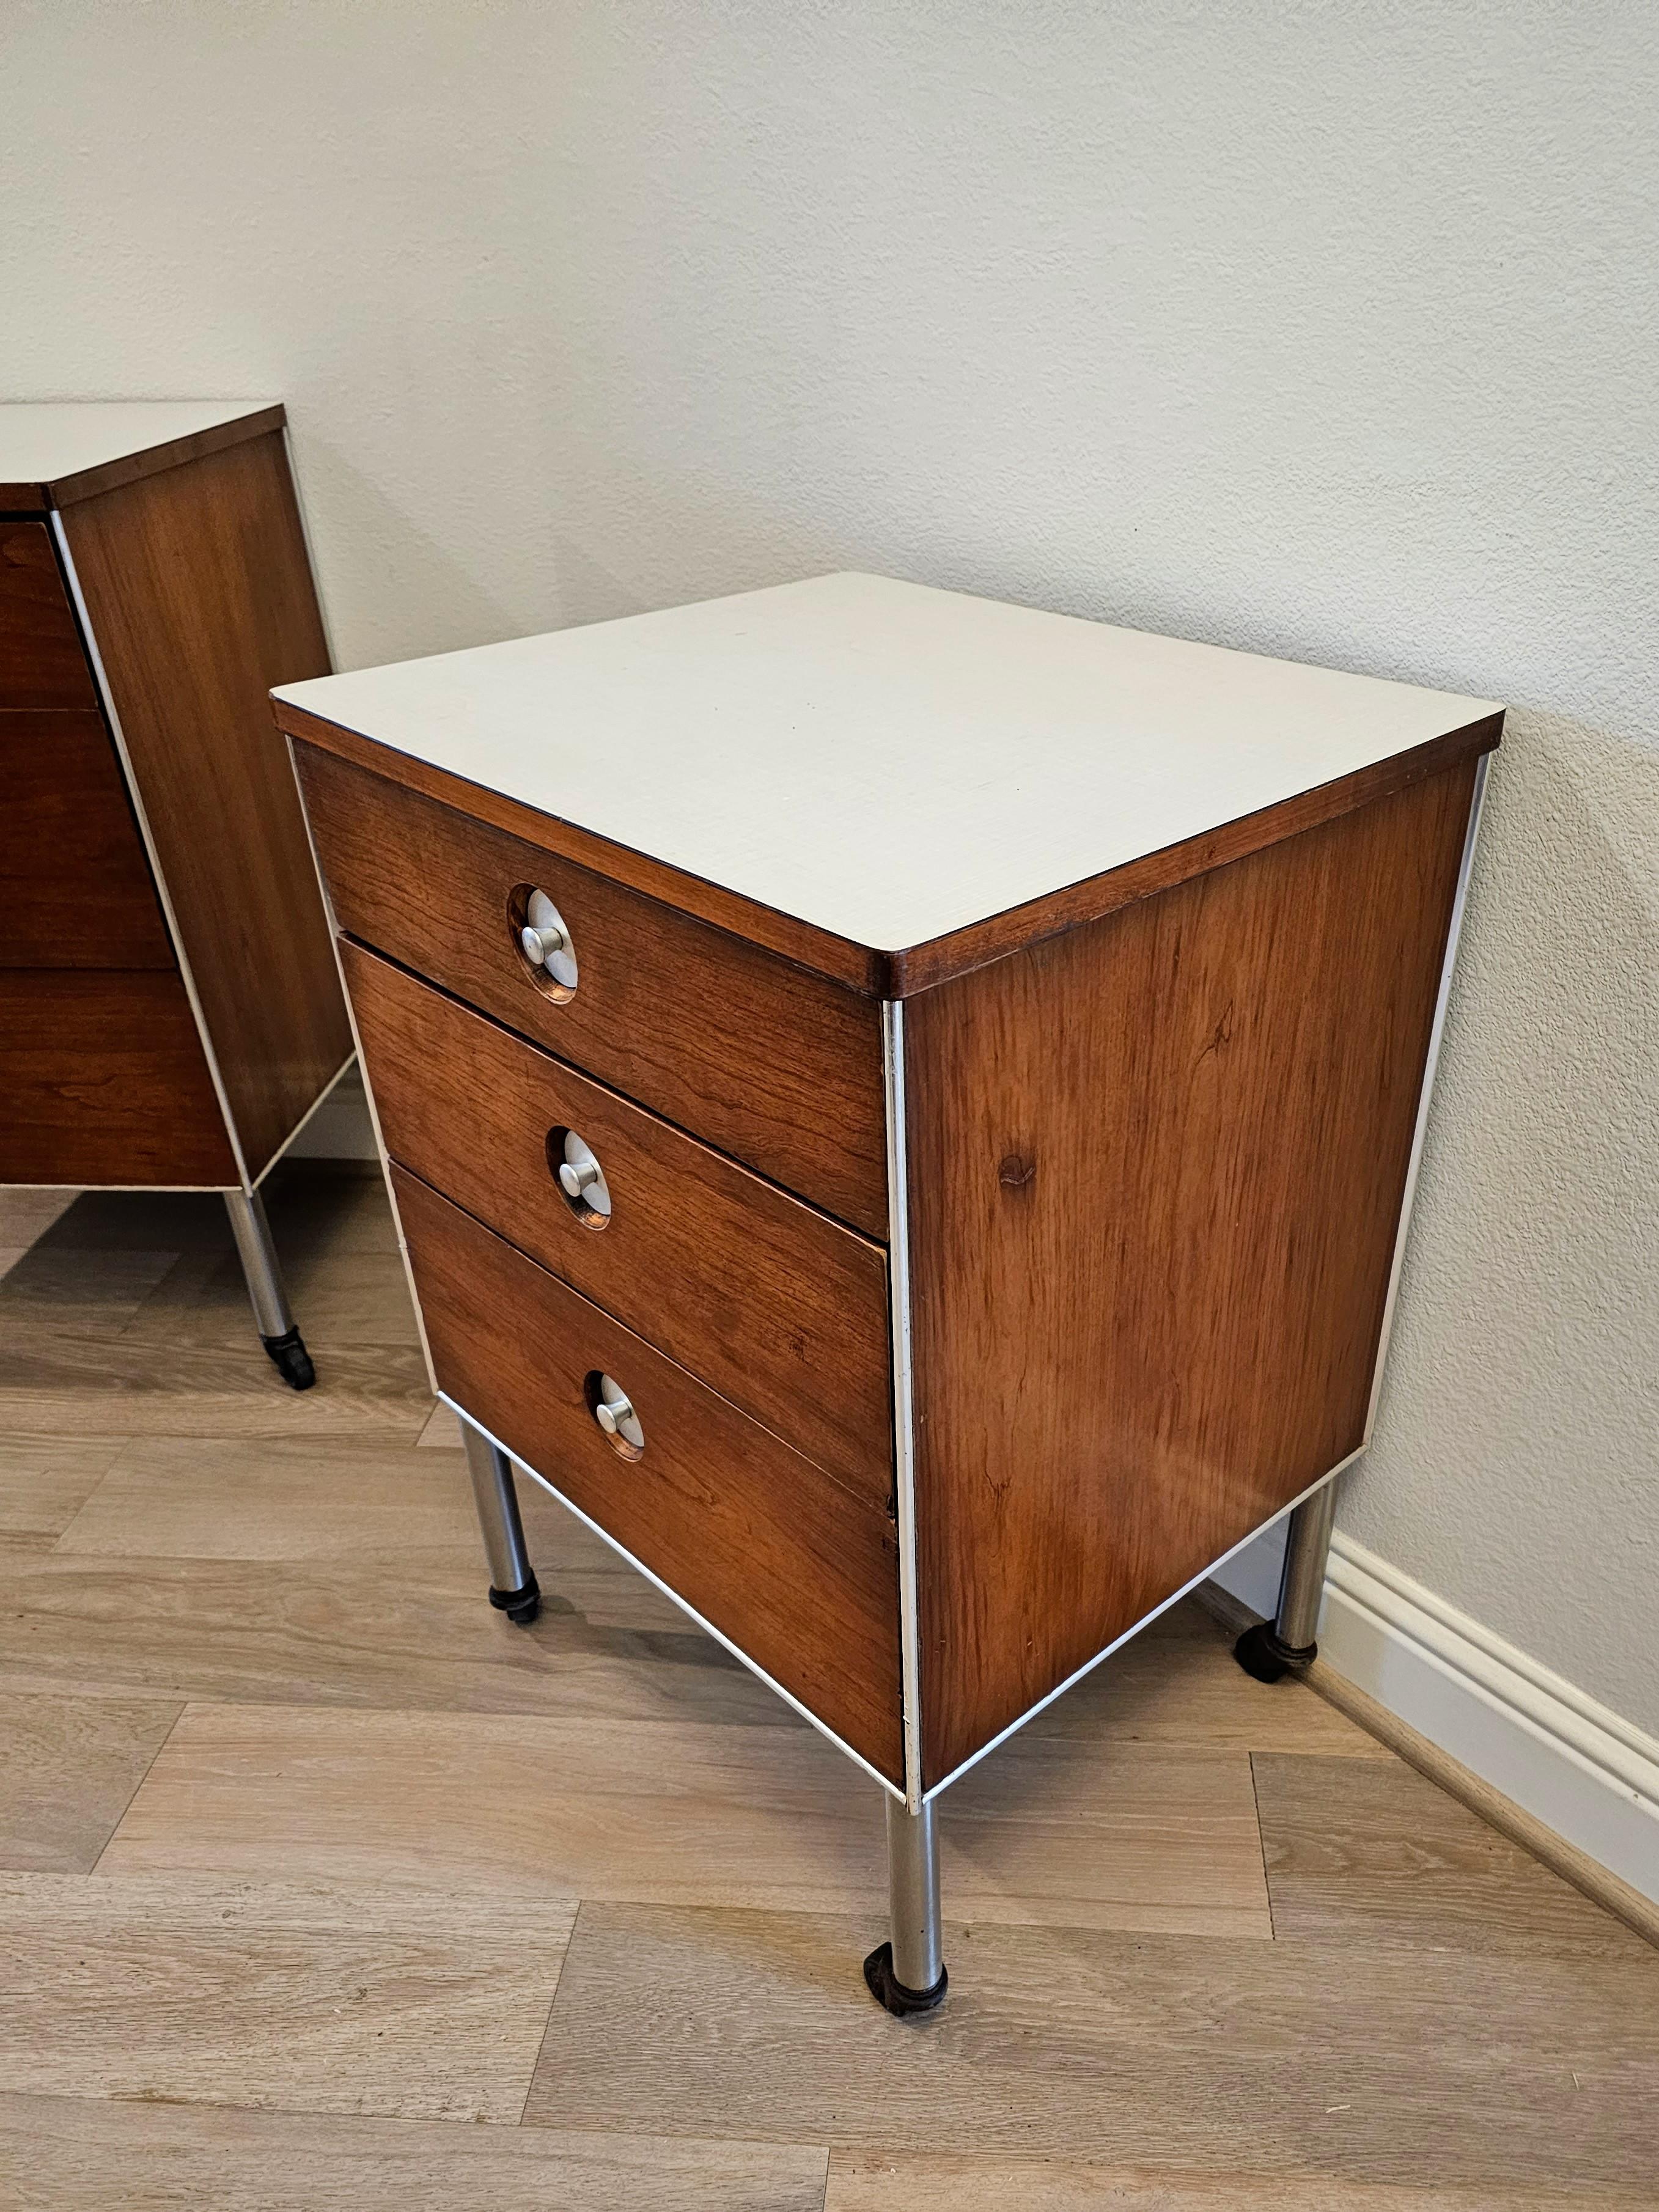 A striking pair of midcentury rolling cabinets by important Industrial designer Raymond Loewy (American, 1893-1986) for Hill Rom. 

Wonderful examples of Loewy's mixed Material work, both vintage medical carts having off-white laminate tops that